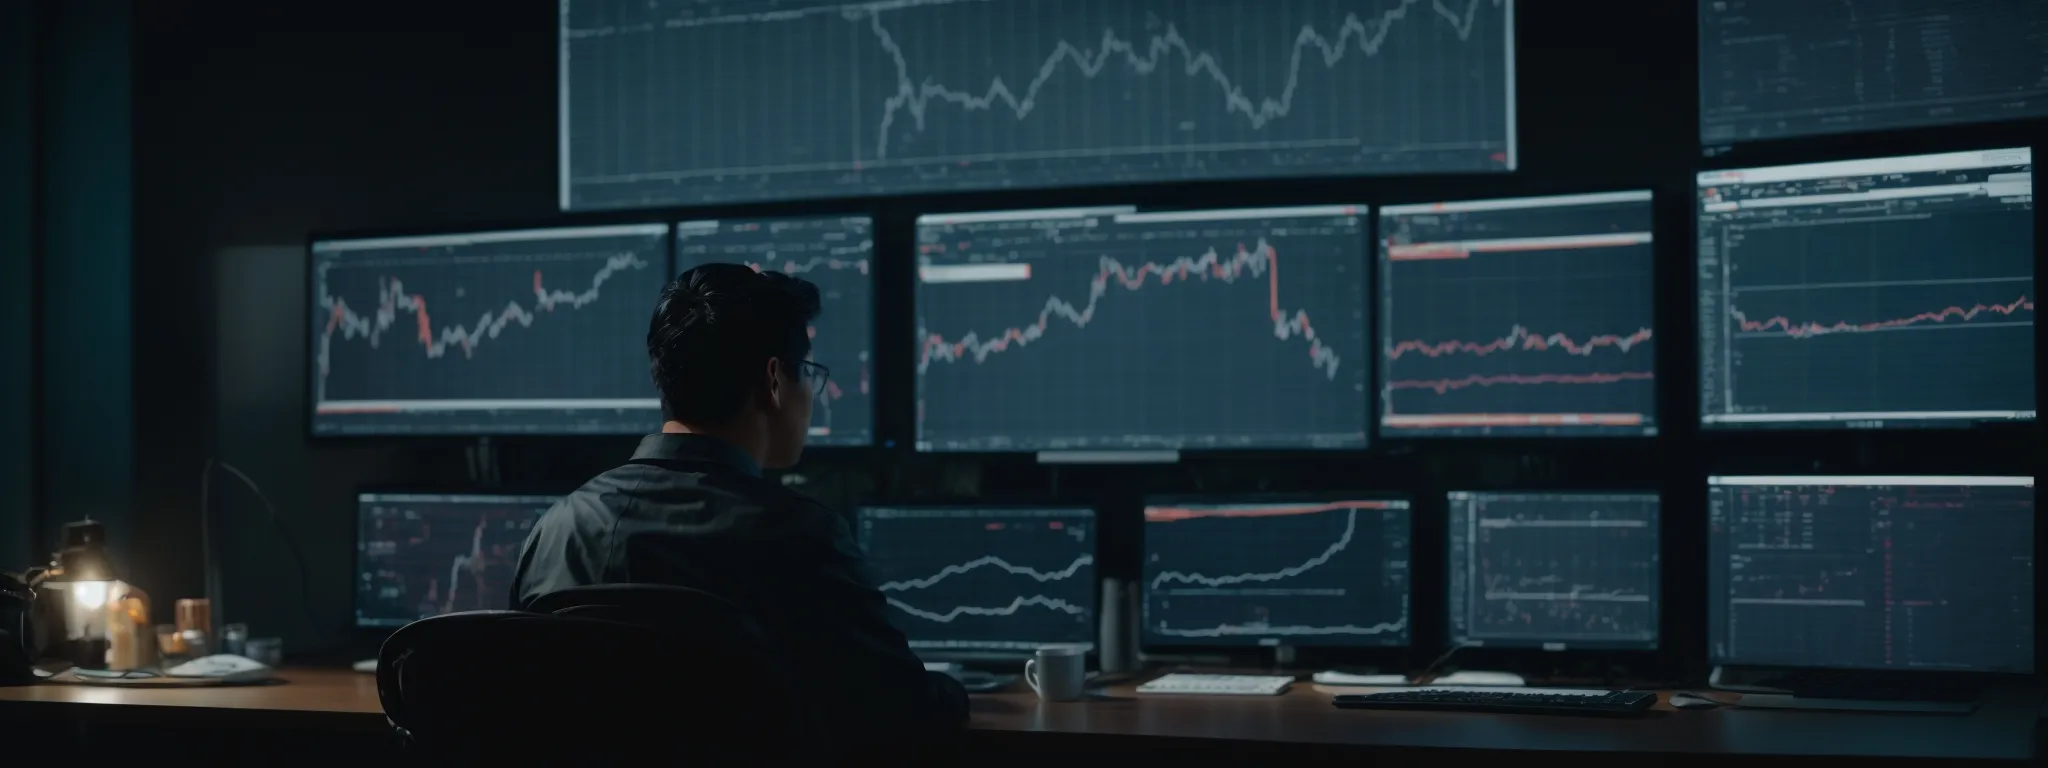 a person sitting comfortably while intently analyzing complex data charts on a computer screen, symbolizing strategic seo optimization.